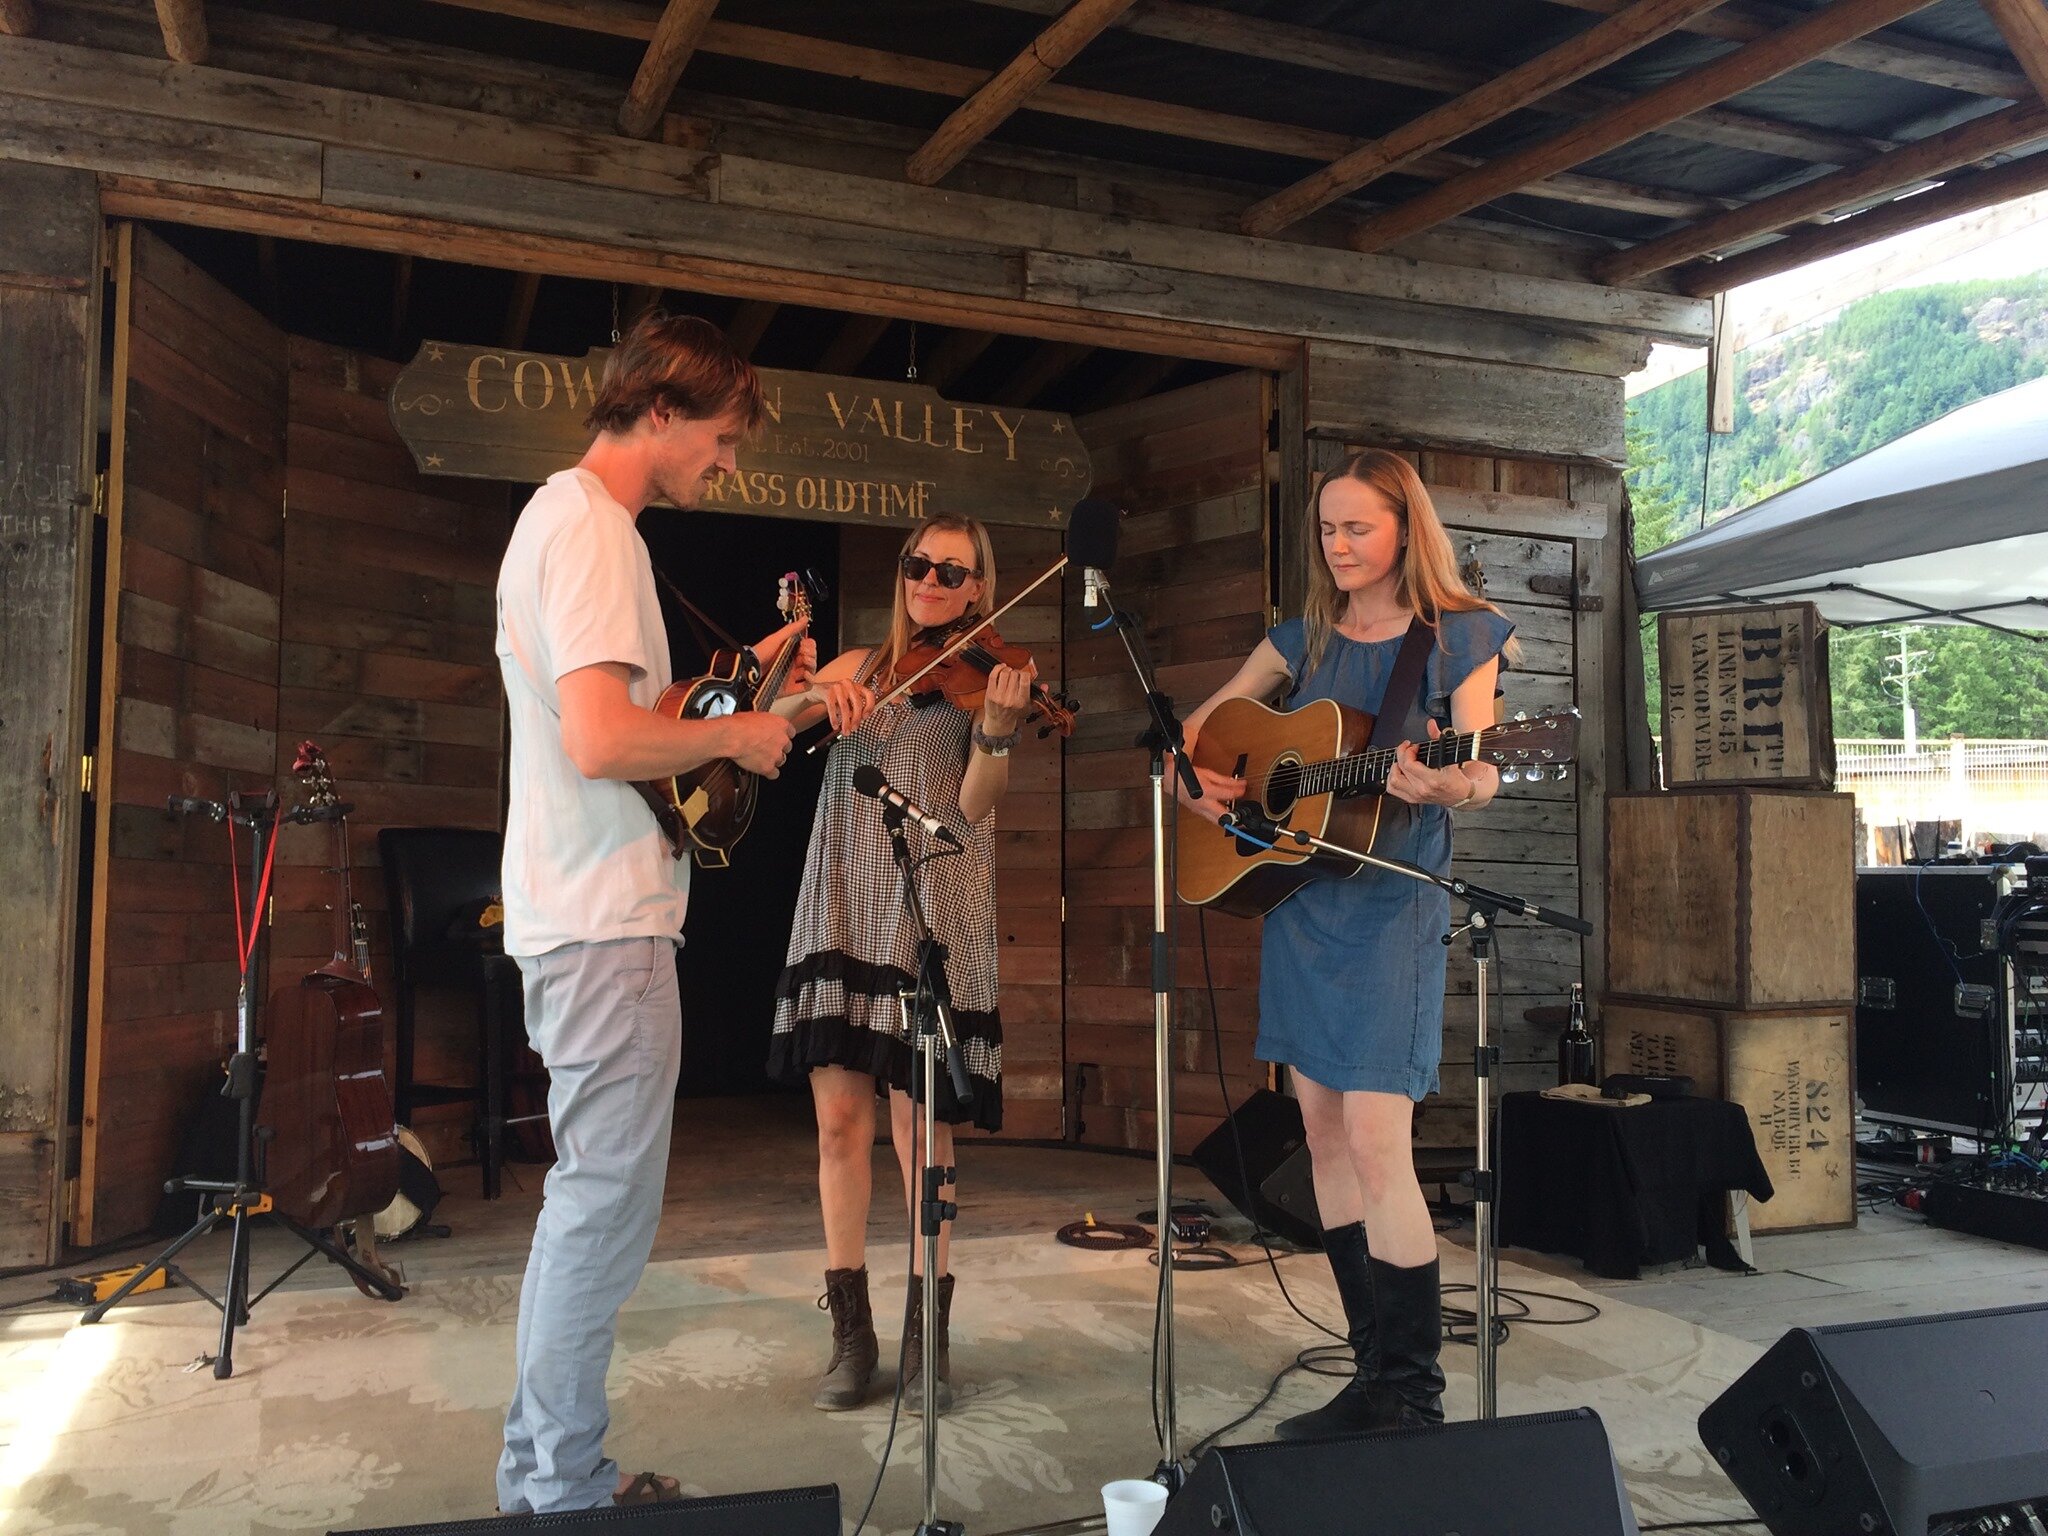 The Sweet Lowdown performing at the 2019 Cowichan Valley Bluegrass Festival